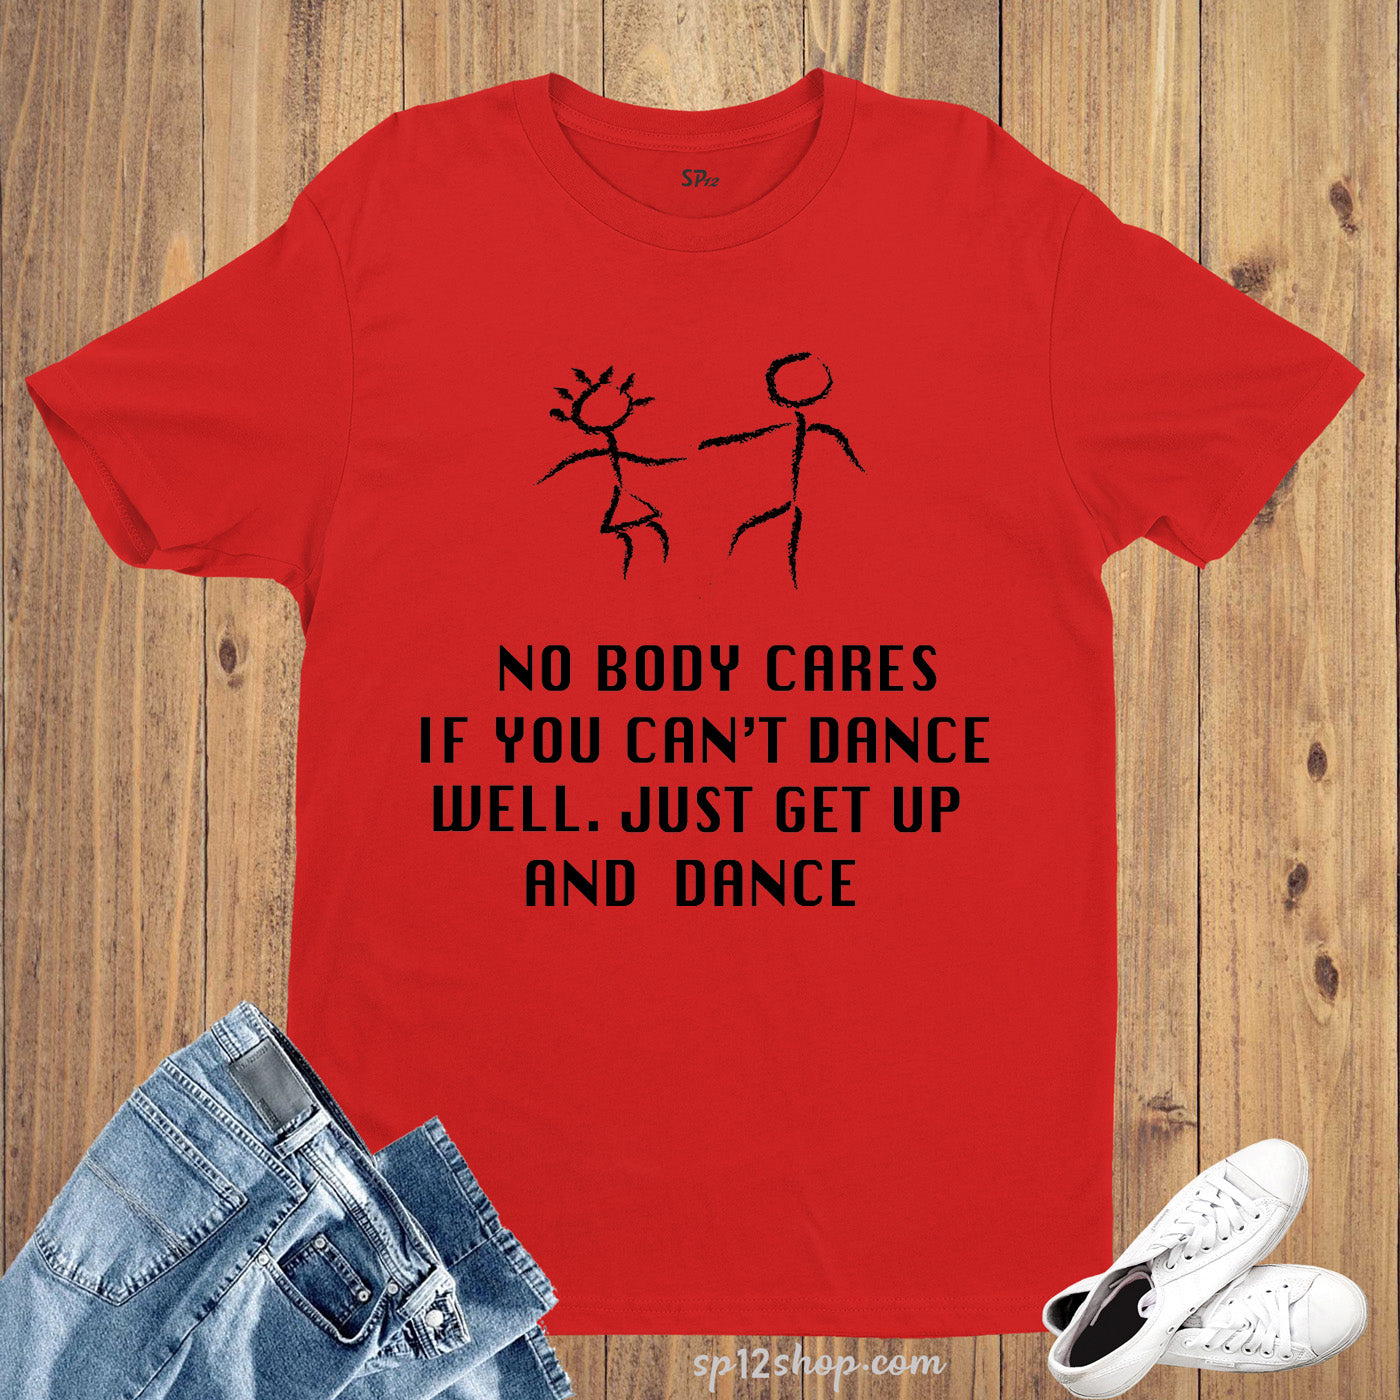 No Body Cares if you can't dance well Just get up and dance Slogan T Shirt